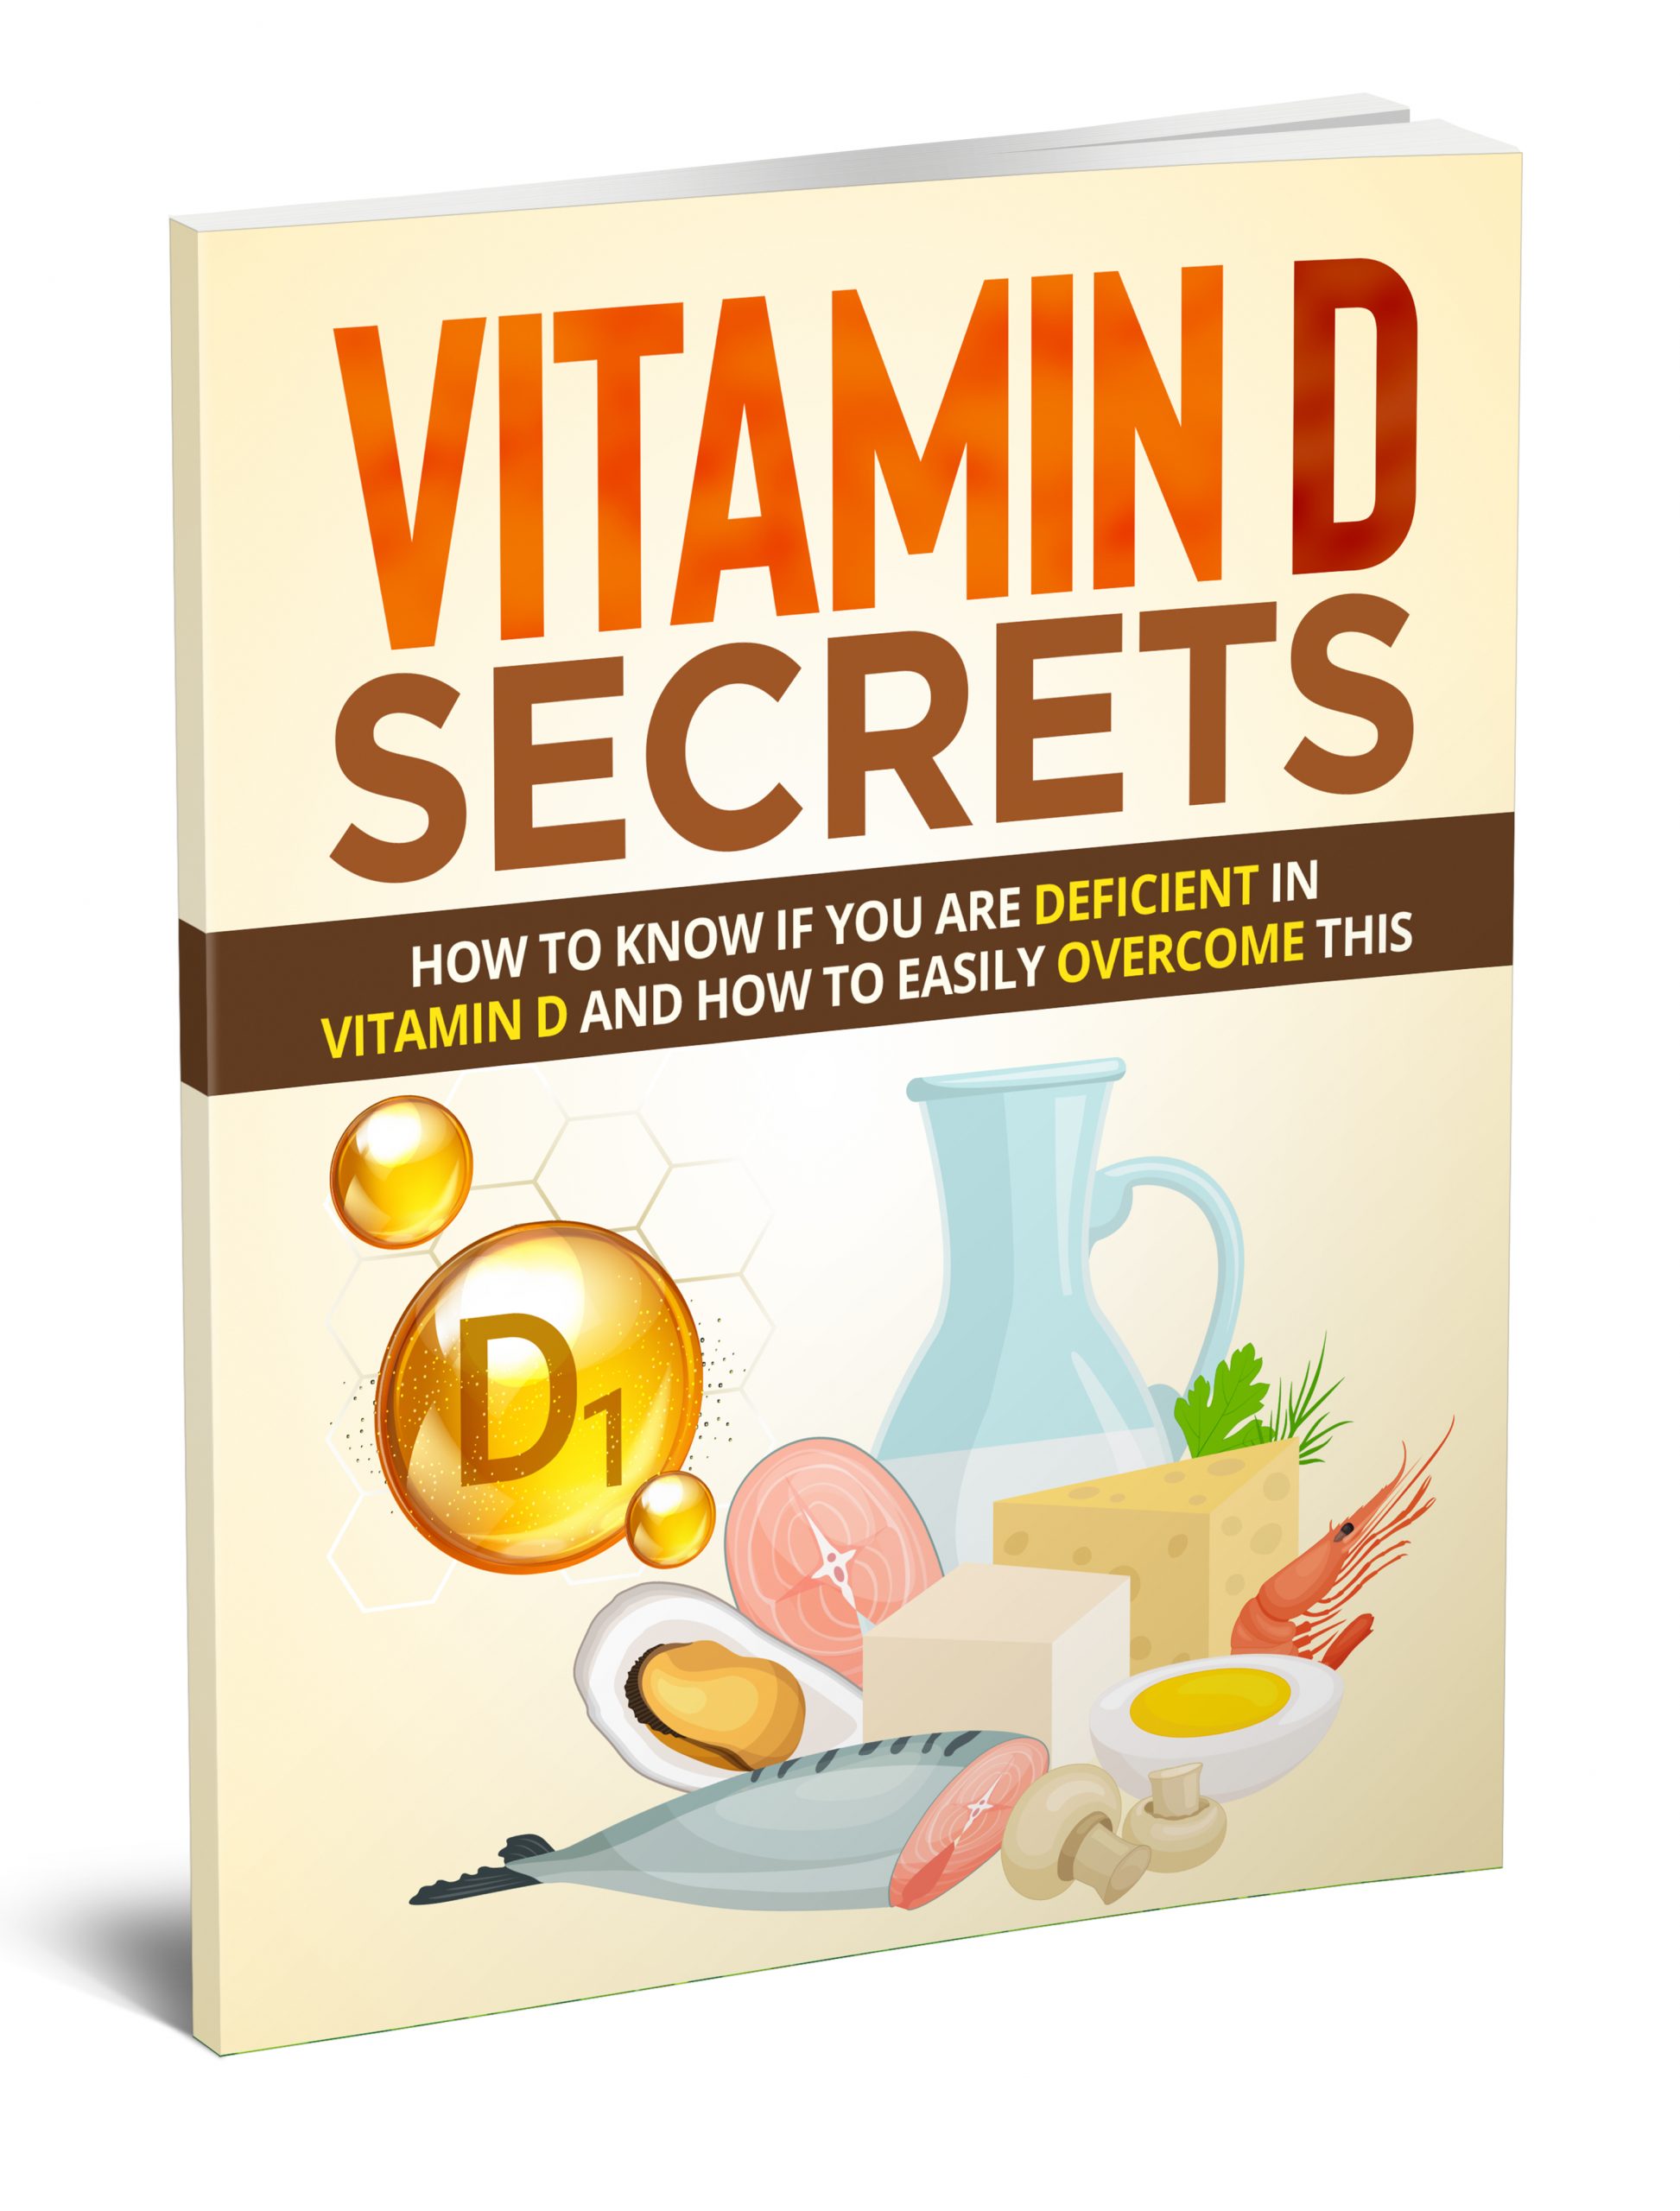 Get Your FREE Vitamin D Course Now And Discover